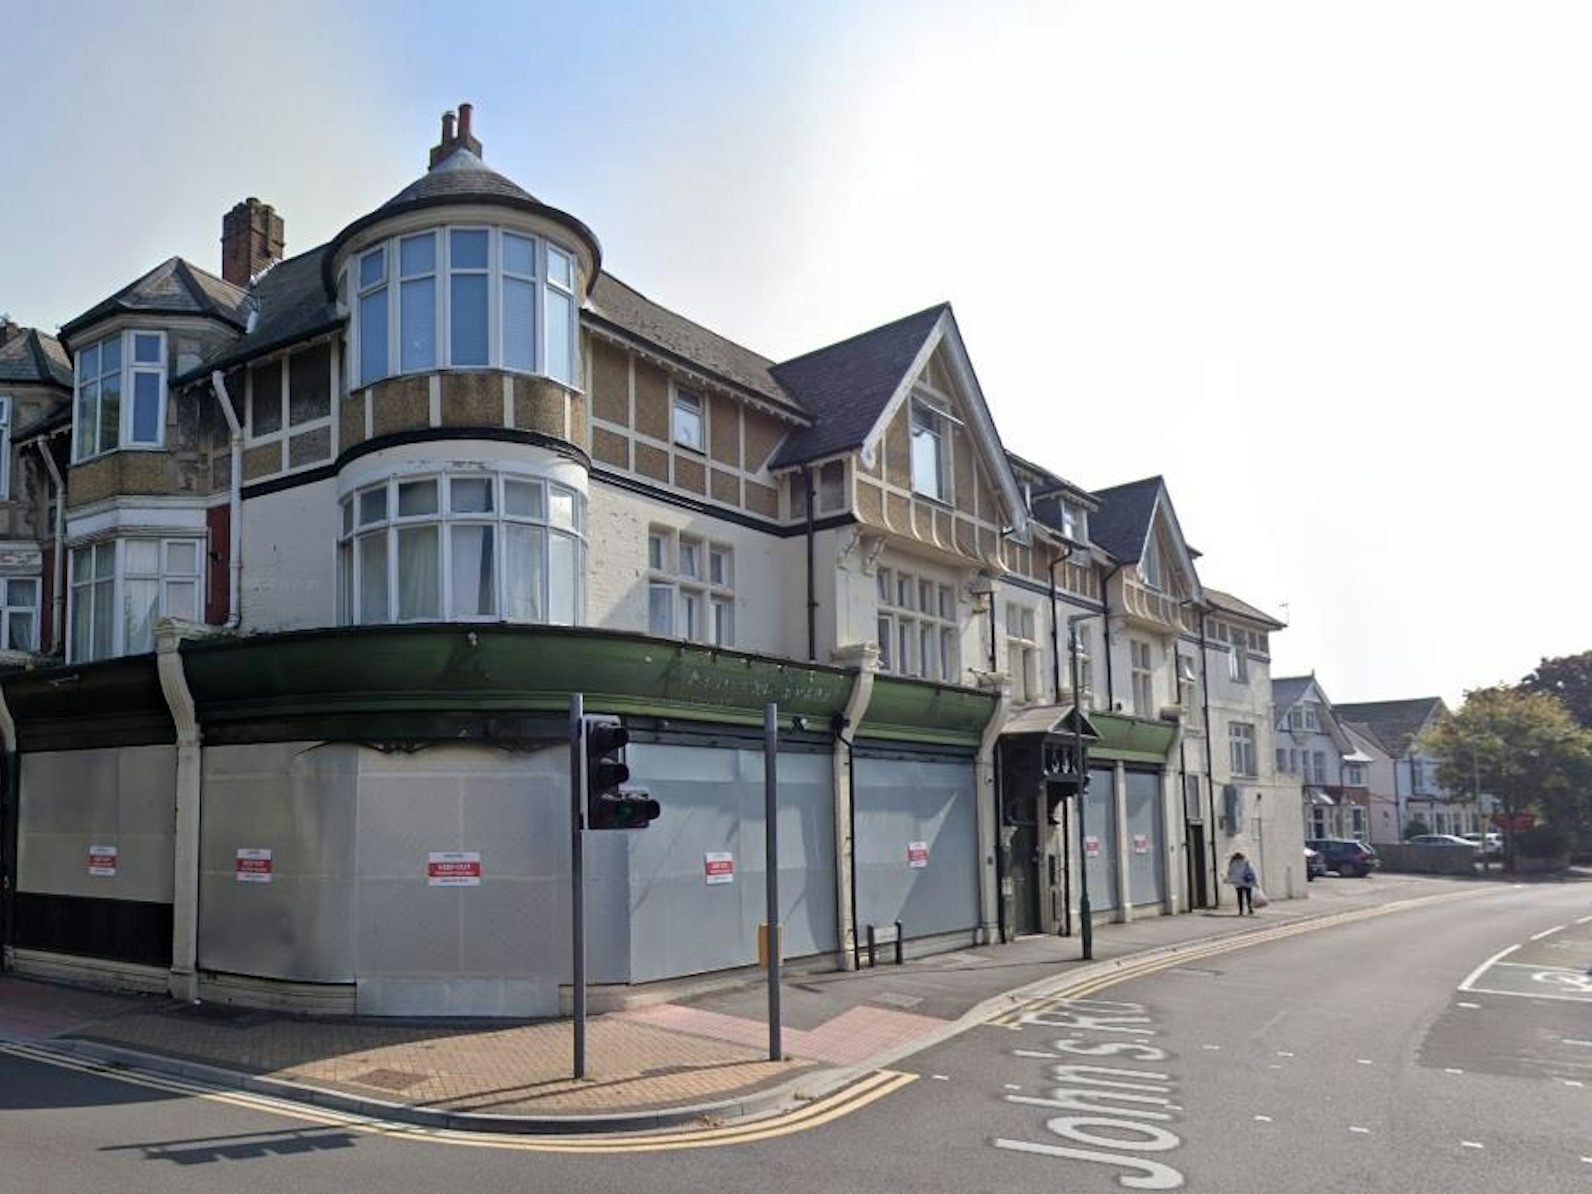 Flat to rent on 491 Christchurch Road Bournemouth, BH1